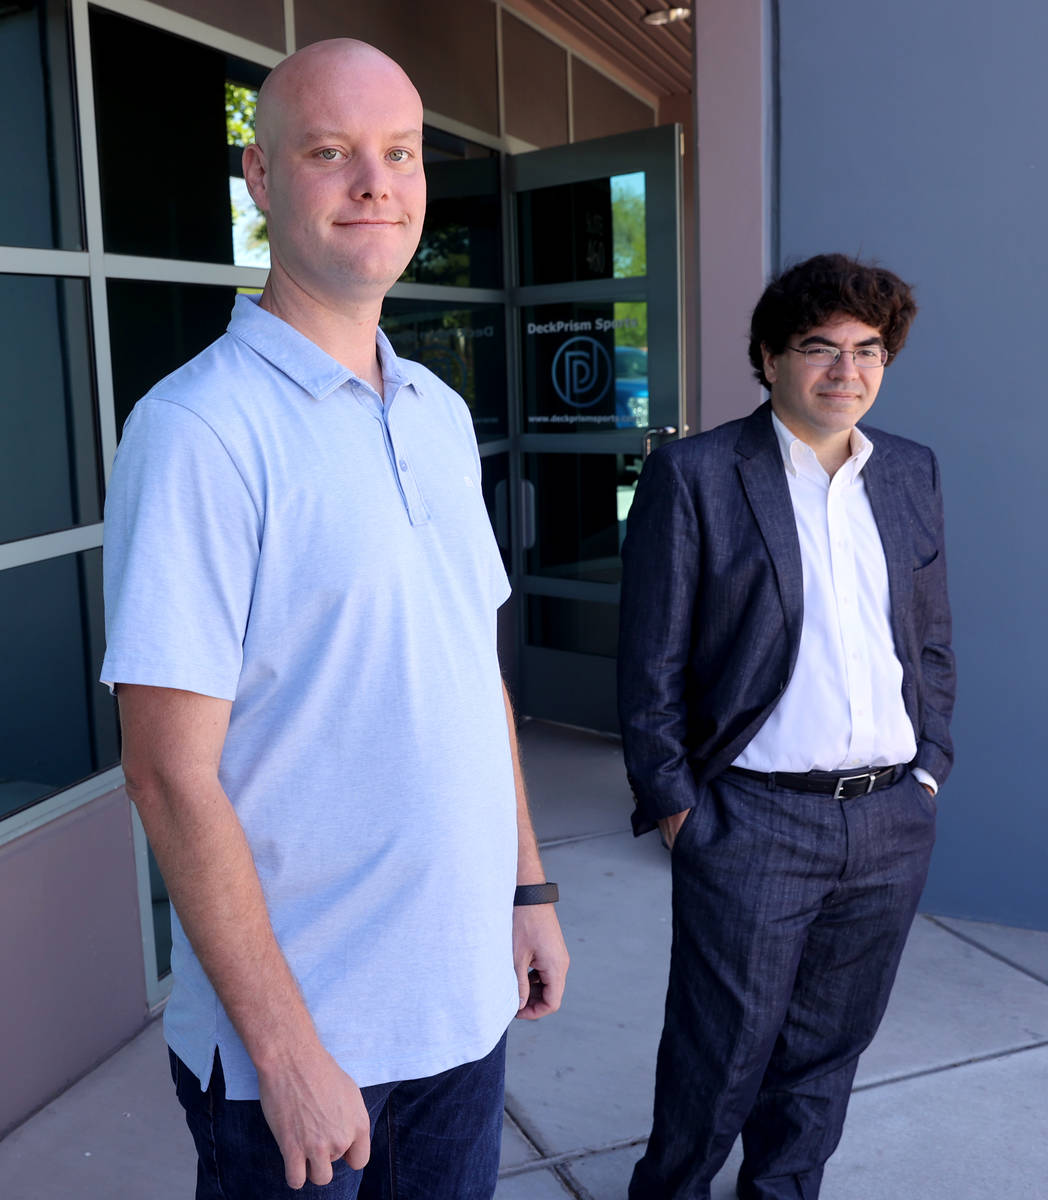 Matthew Davidow, left, and Ed Miller, co-founders of in-play betting company Deck Prism Sports, ...